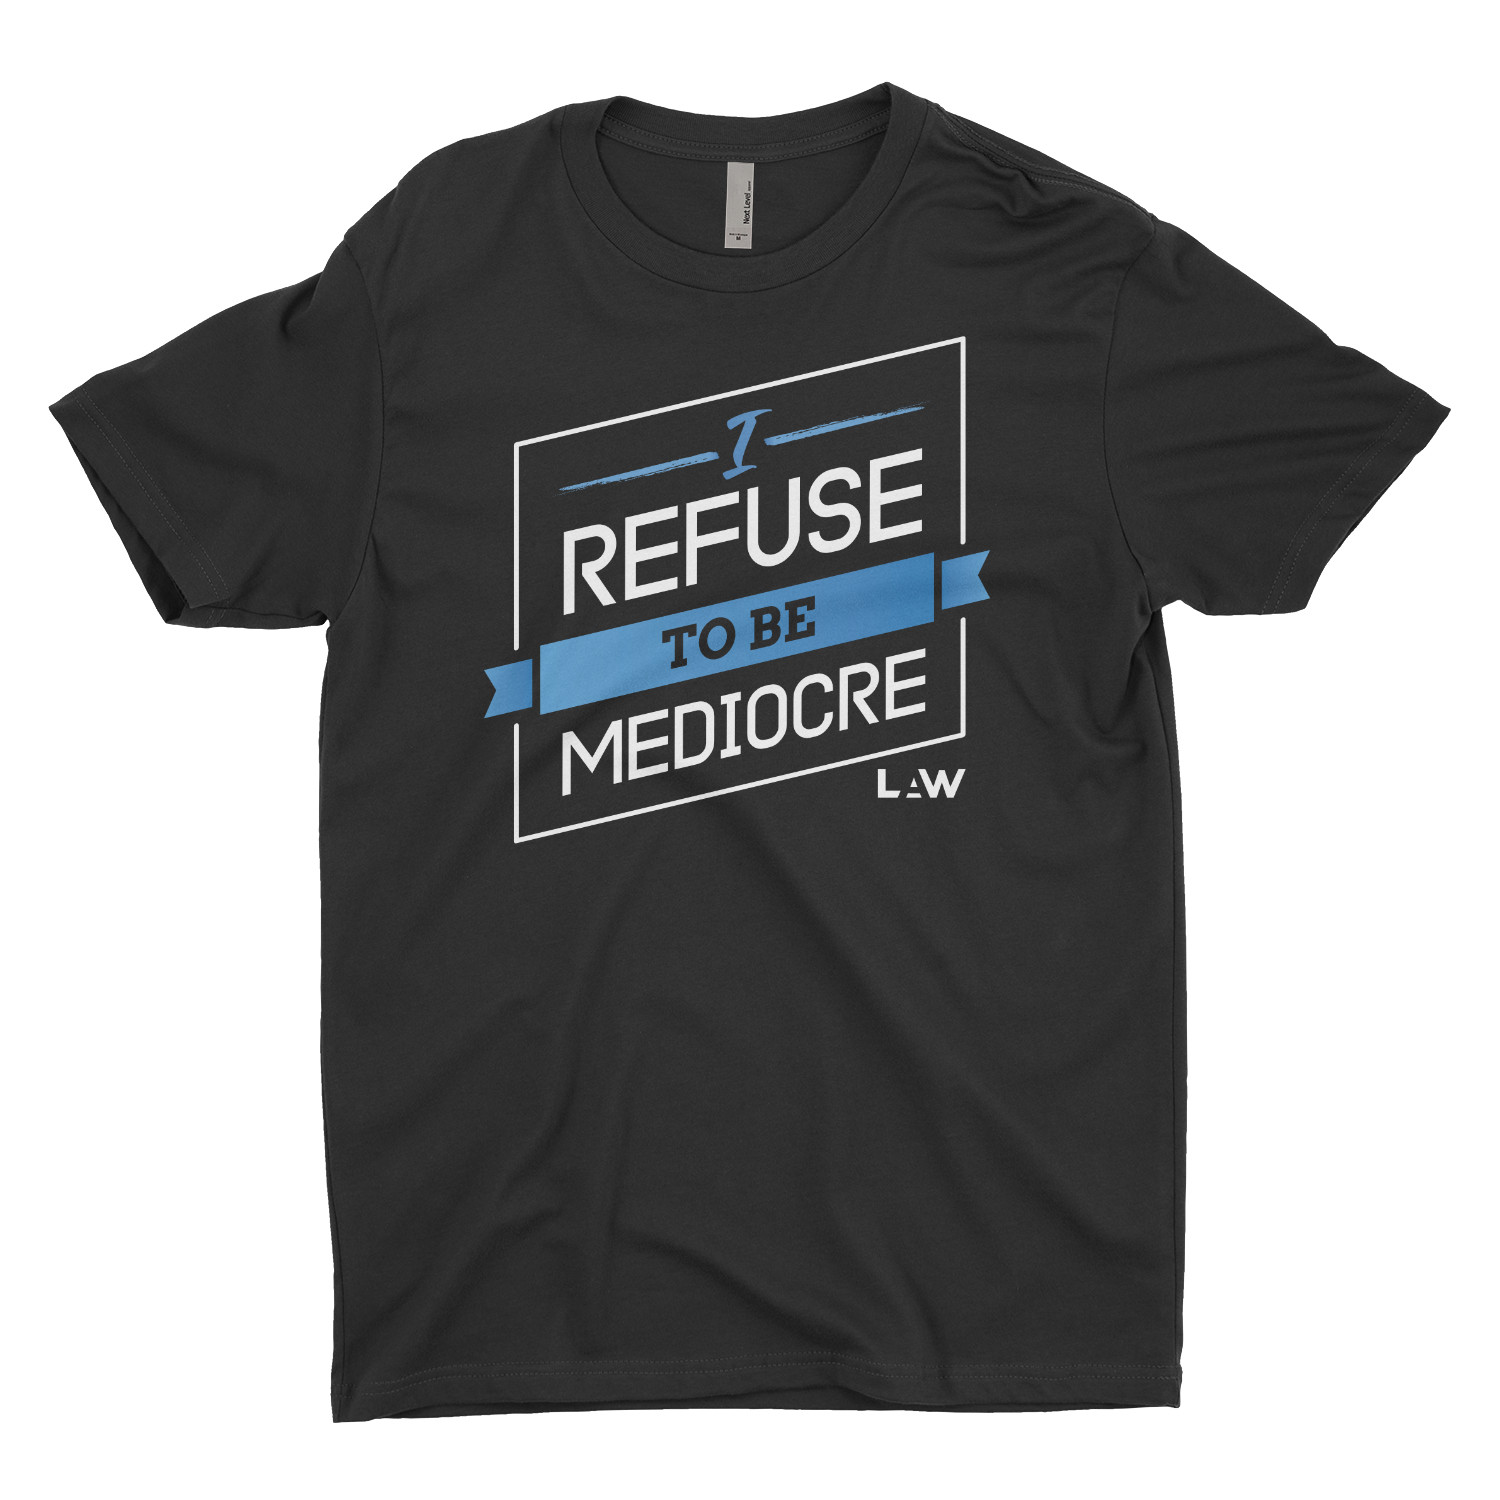 I Refuse To Be Mediocre Tee